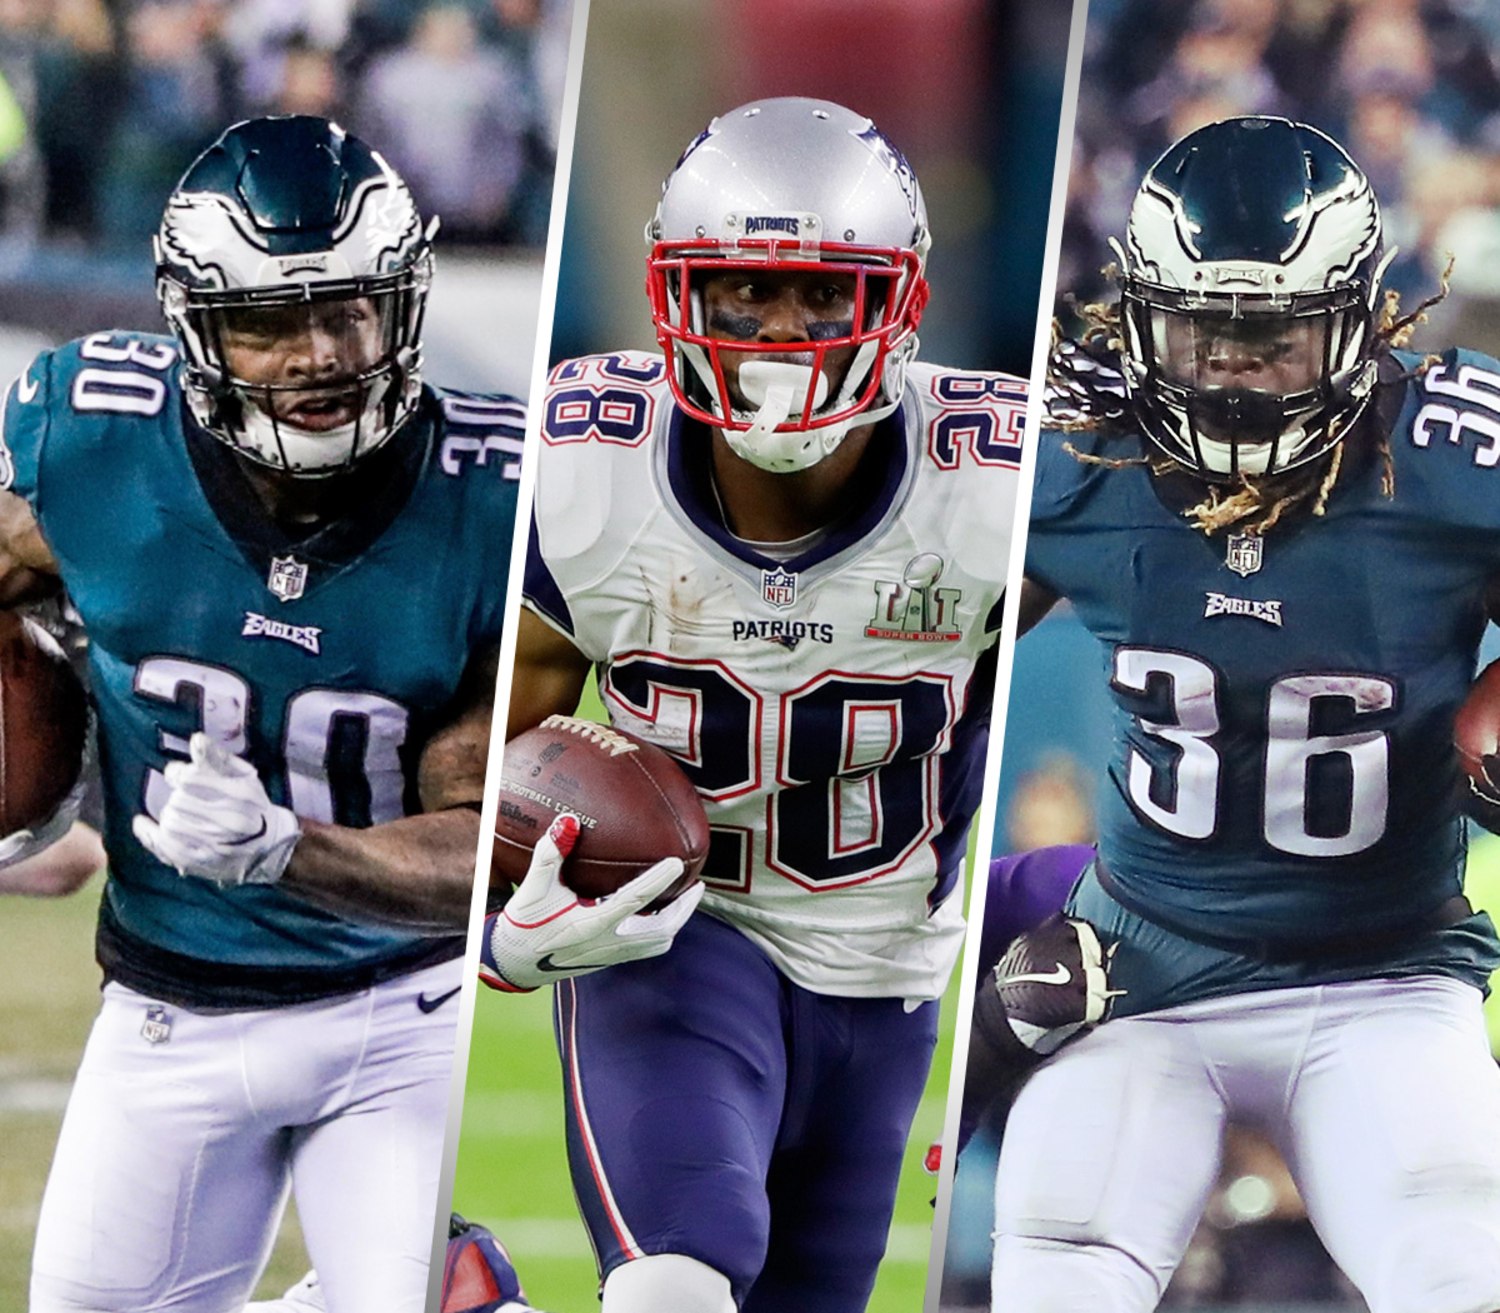 Super Bowl LII: Black running backs who could lead their teams to victory